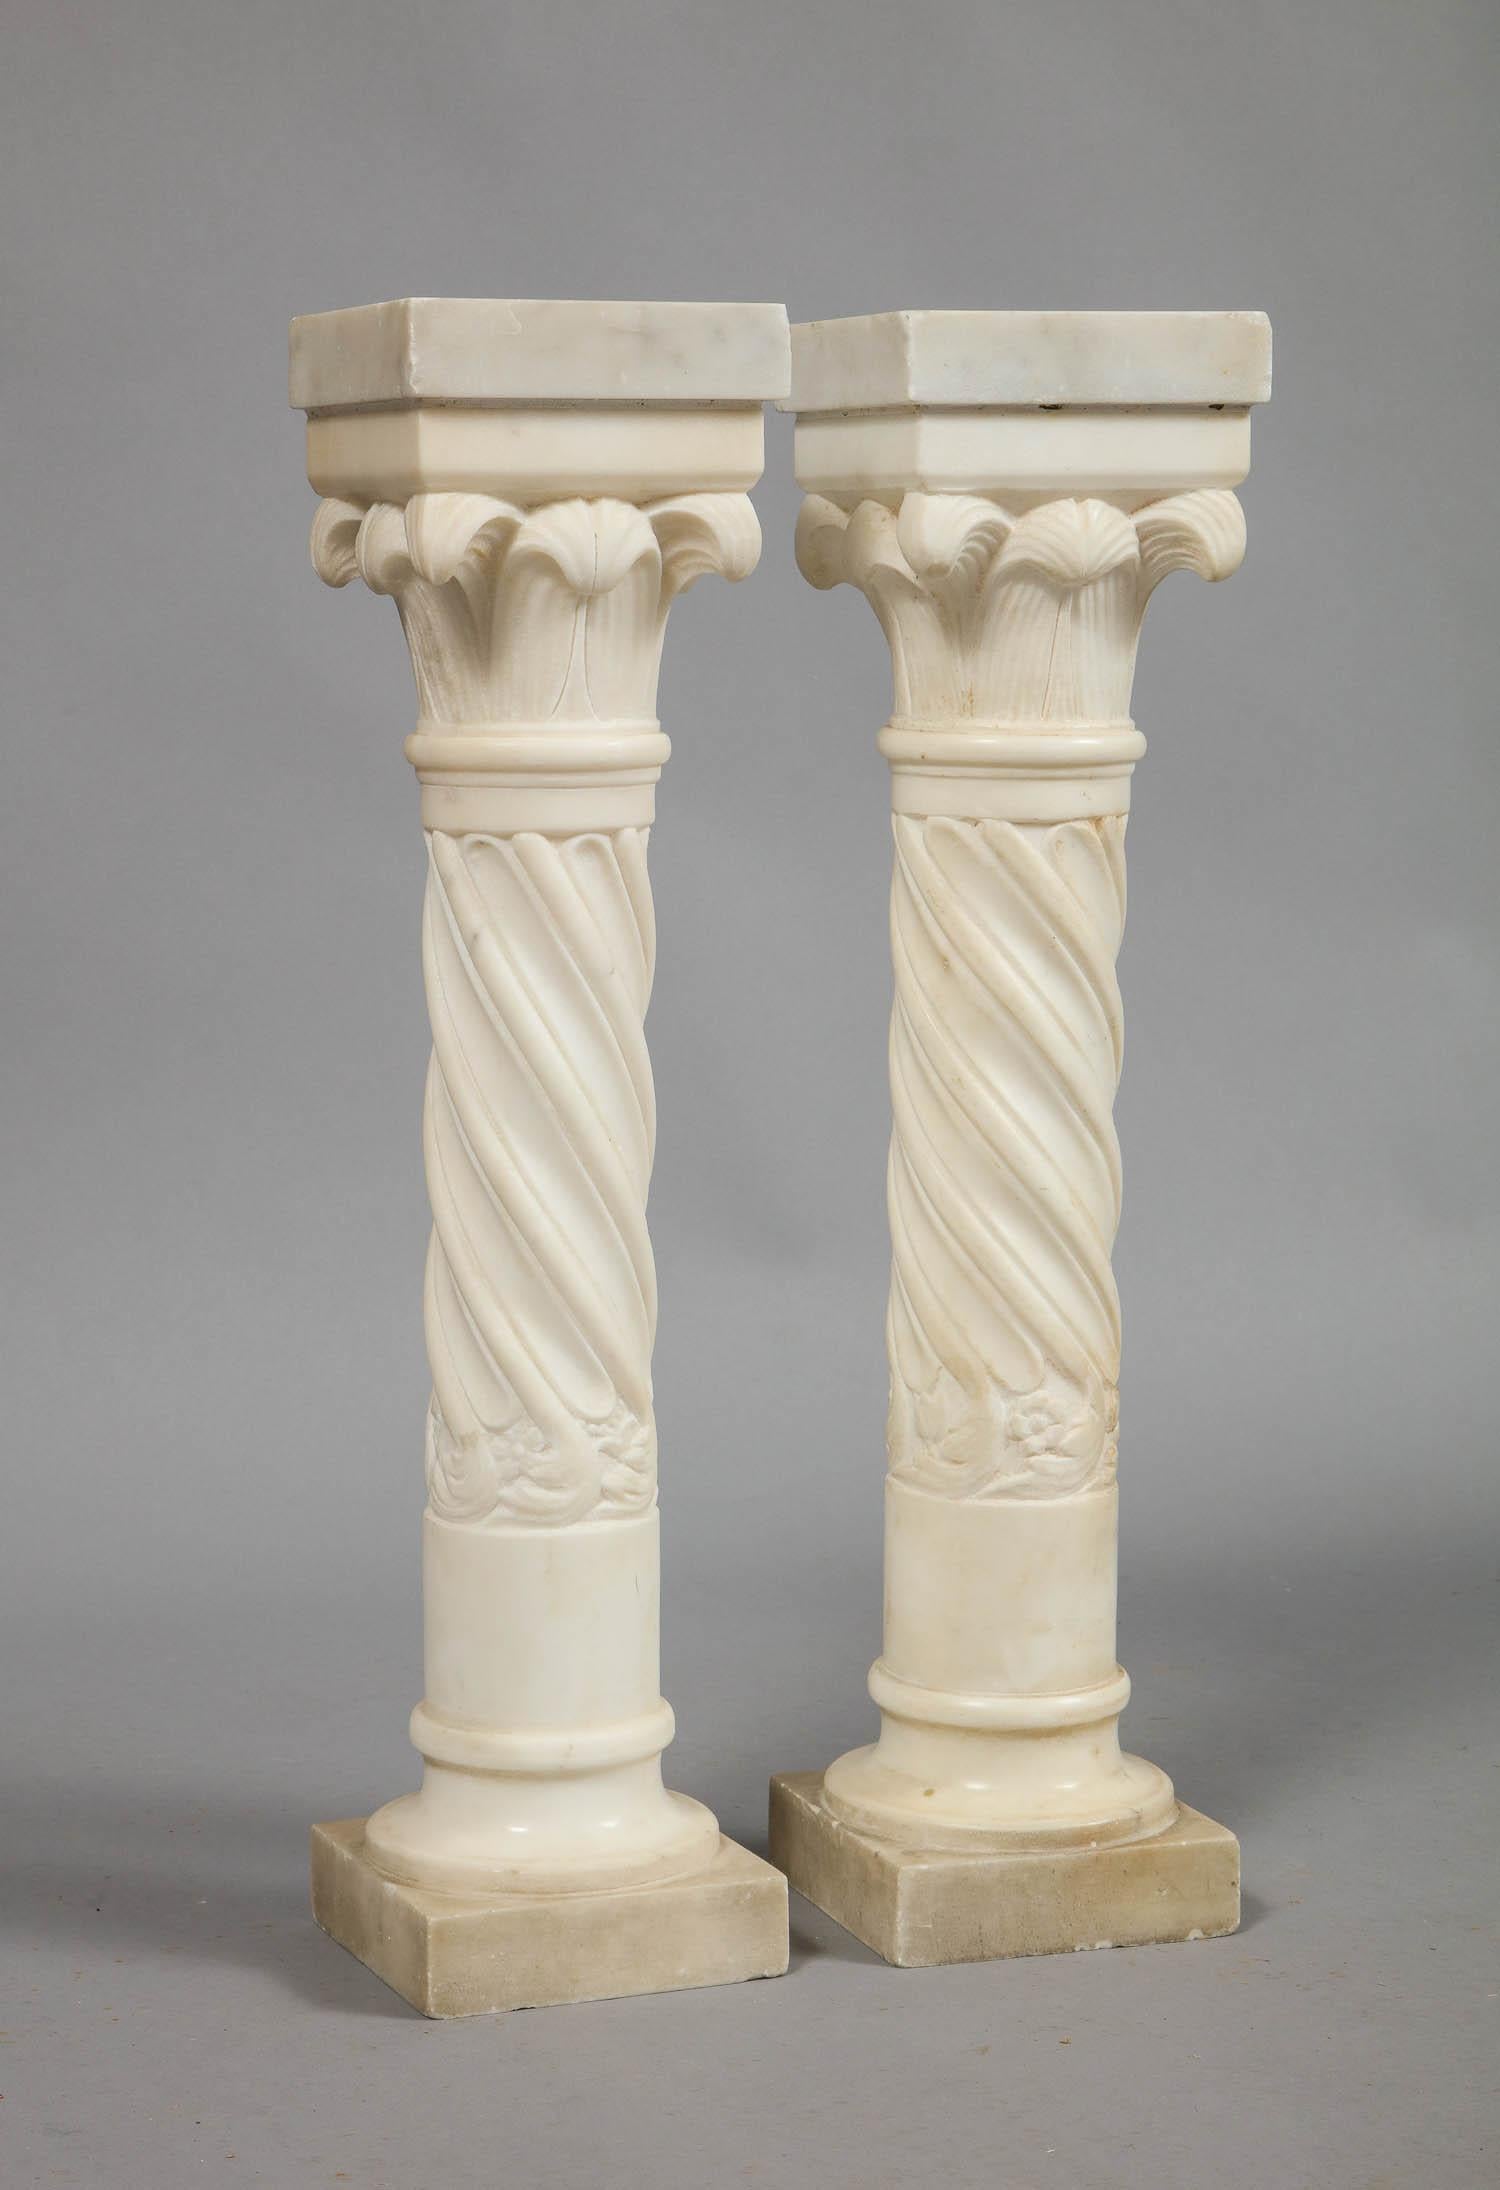 A pair of white marble columns with twist shafts and leafed capitals, perhaps Stanford White or Addison Meisner. For use as decorative accessories, or can be converted to lamps.